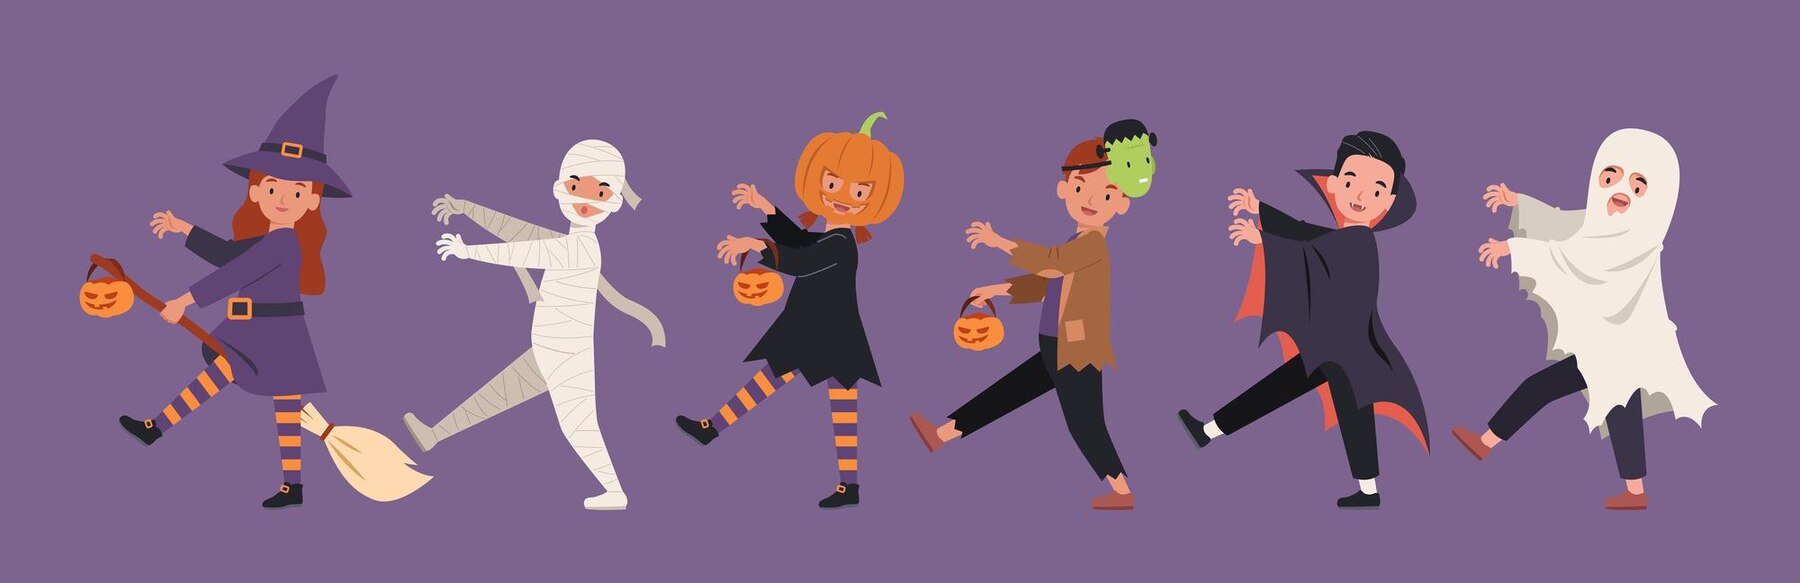 five children wearing halloween costumes marching in a line